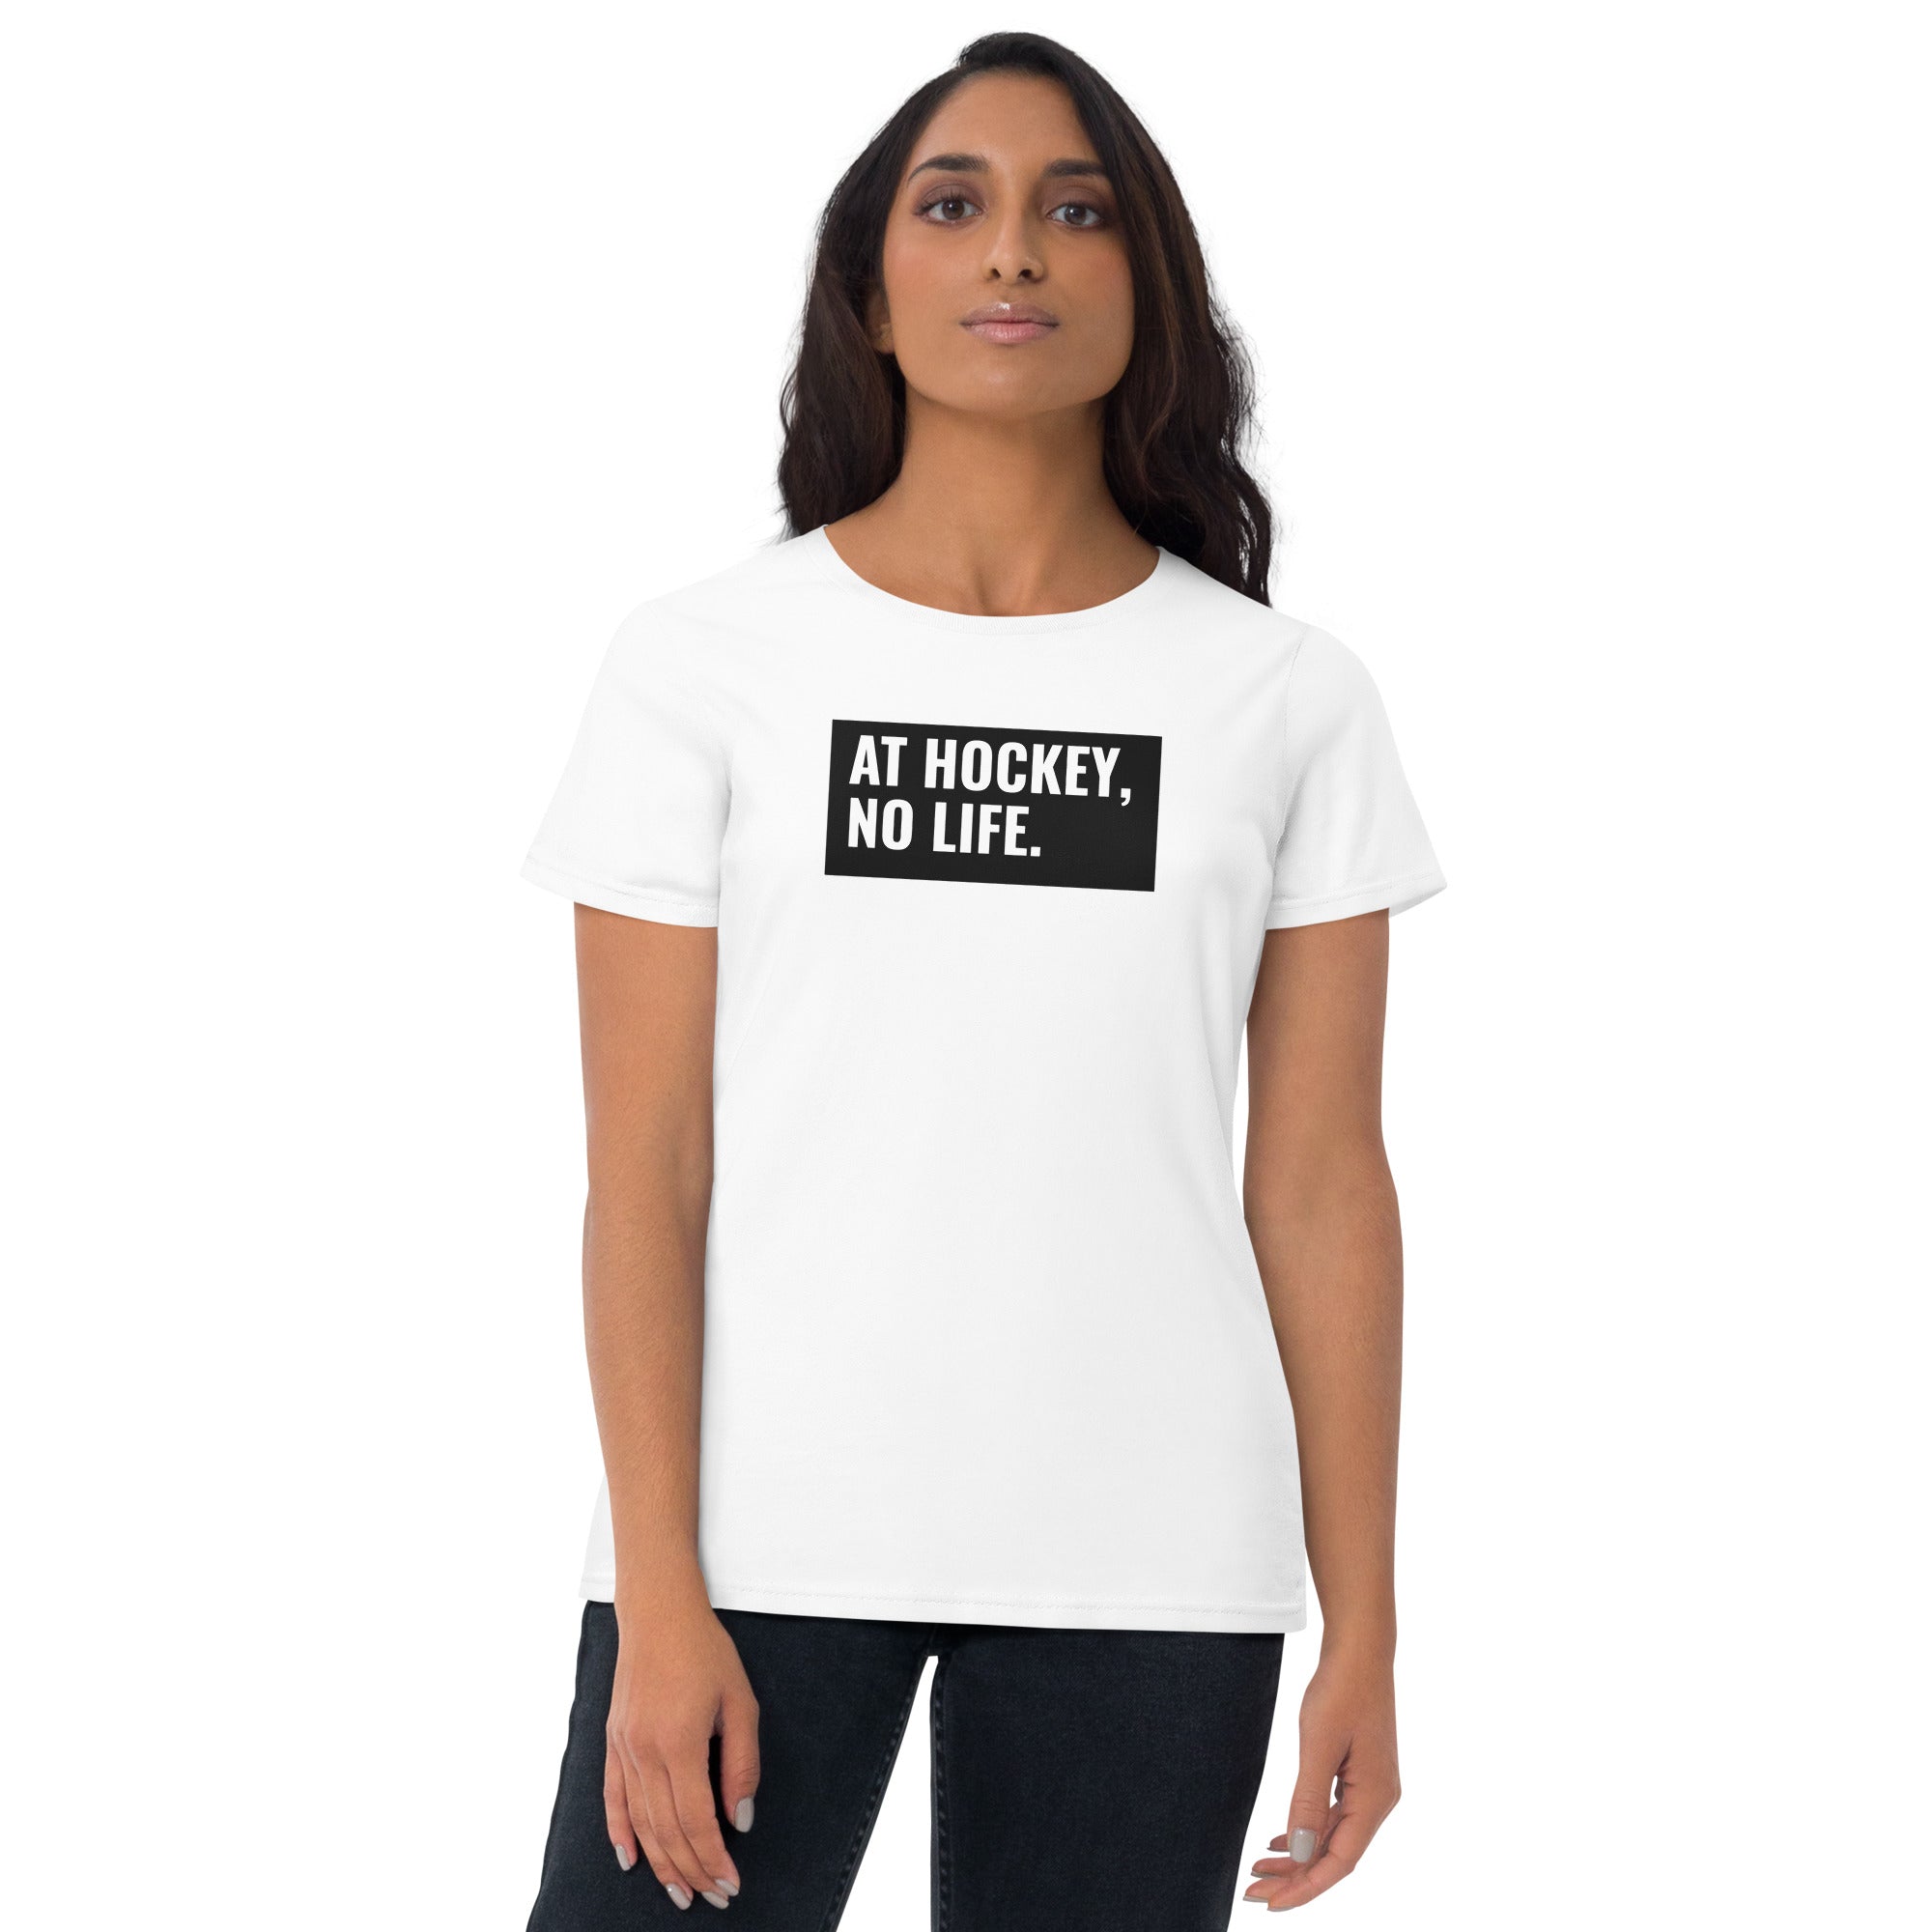 At Hockey, No Life Women's Fitted T-Shirt